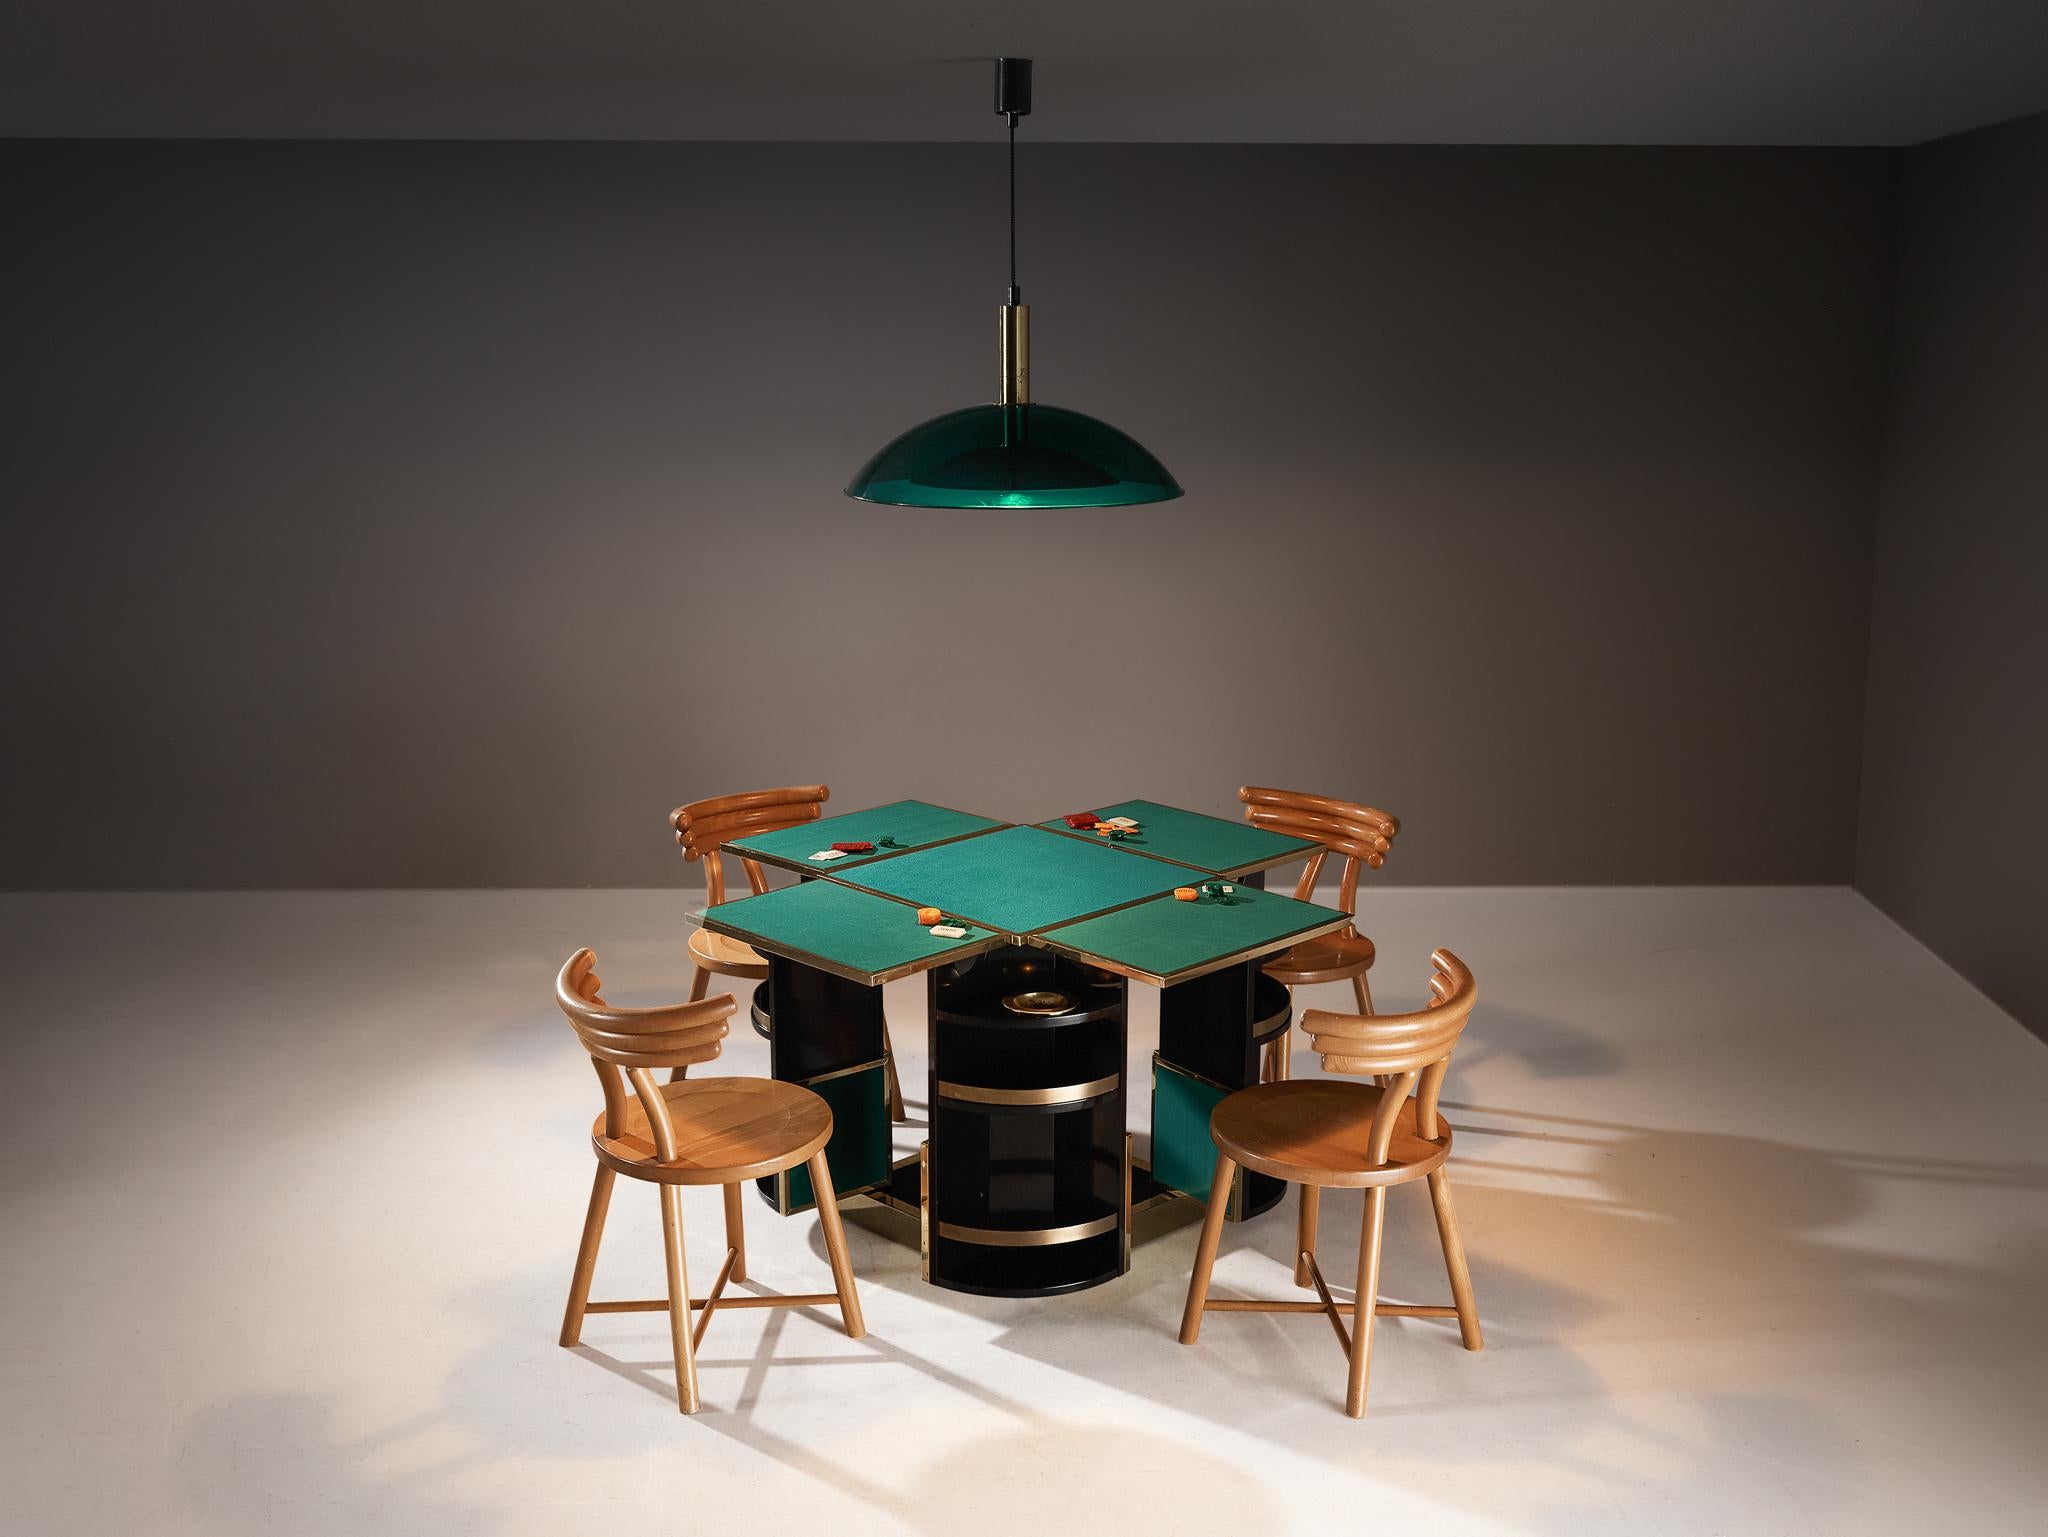 Renato Meneghetti, 'Cubo' game table set with matching lamp and four wooden chairs, brass, felt, metal, wood, Italy, 1970s

This lovely set exists of a convertible game table, a matching pendant, and four wooden chairs. 

Designed by Renato